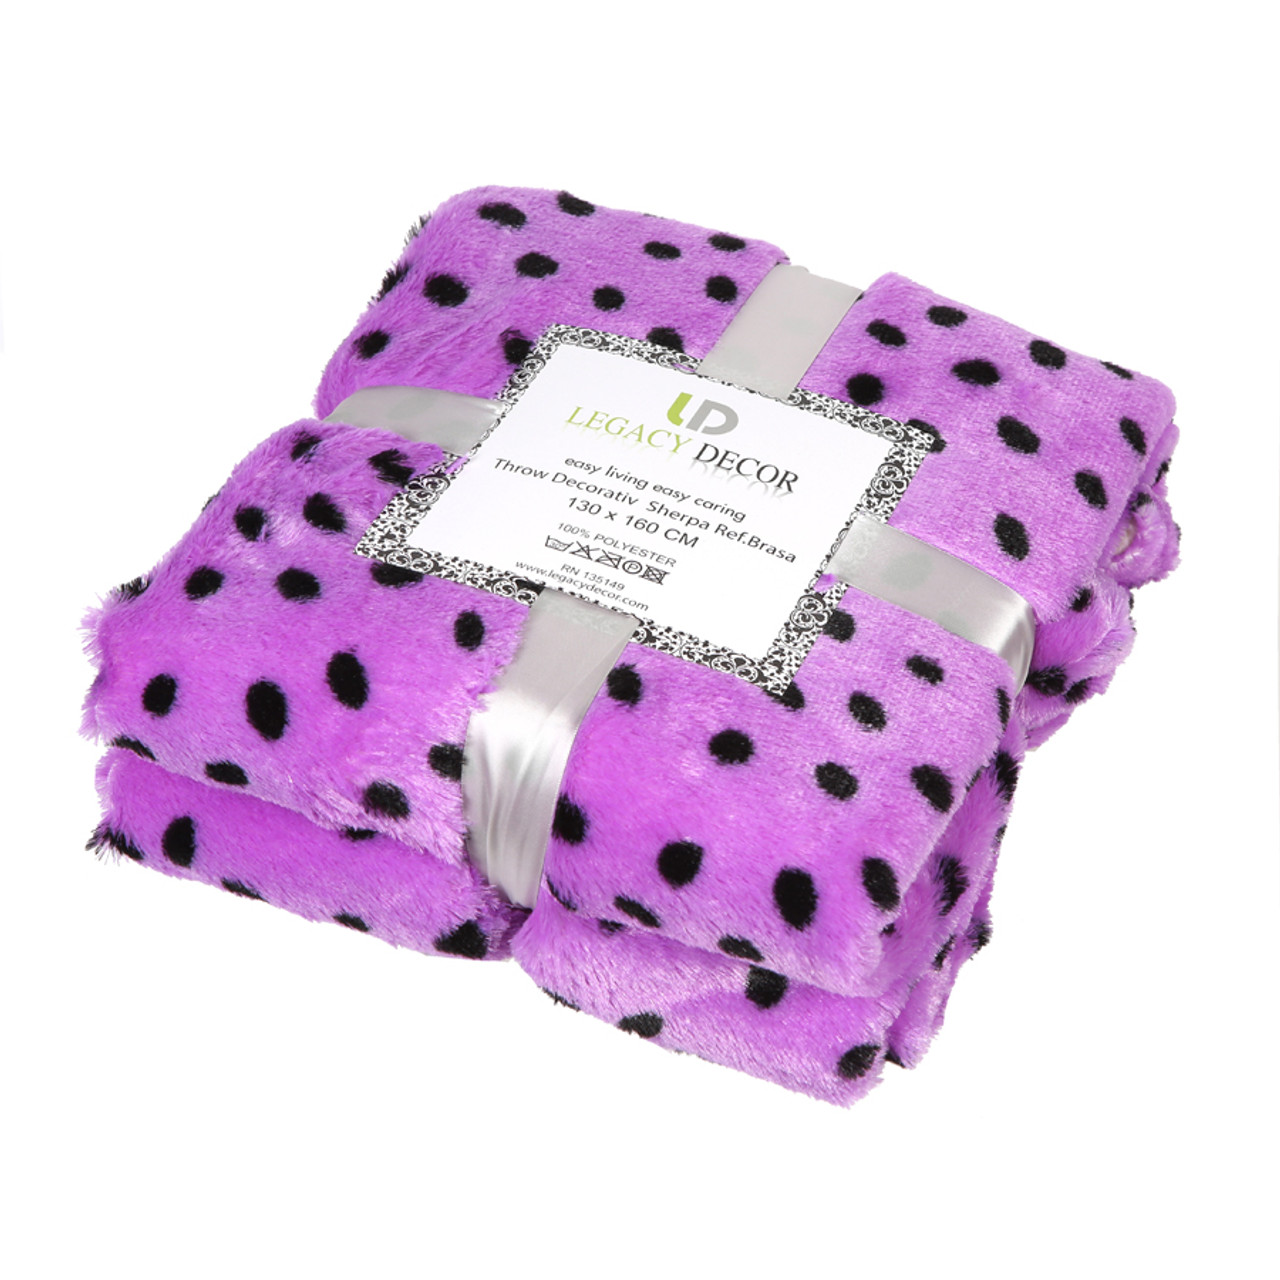 Luxurious Ultra Soft Throw Blanket with Sherpa Purple Polka Dots Design